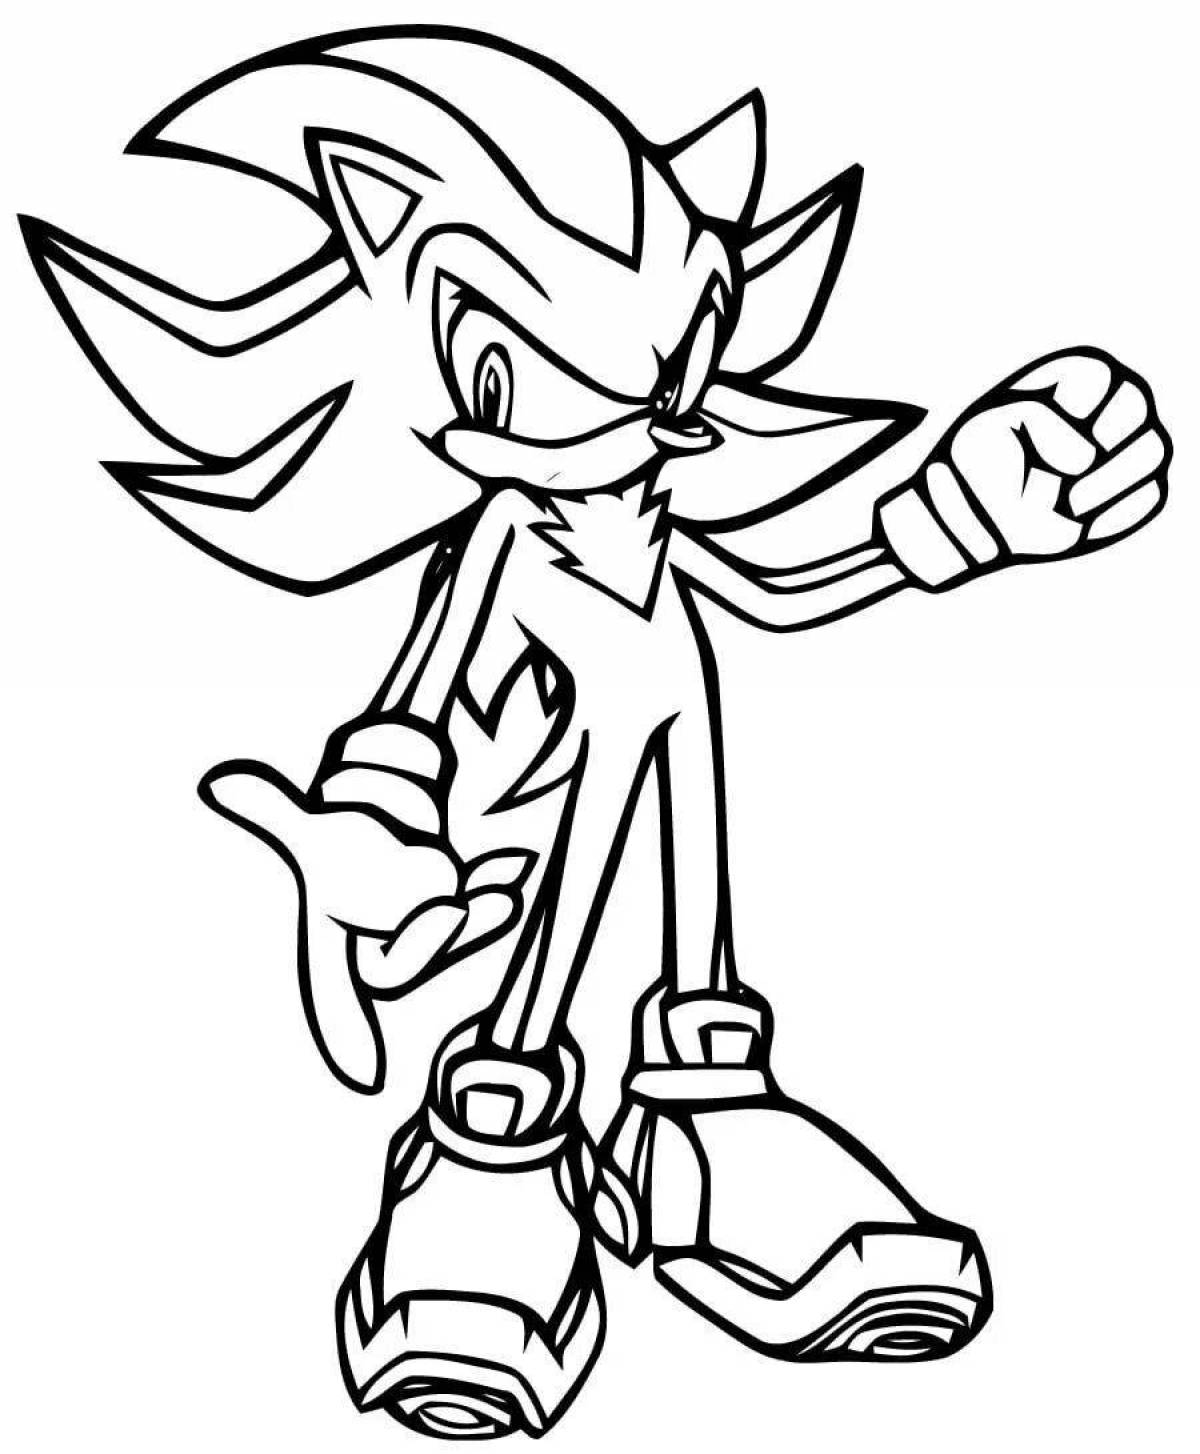 From sonic shadow #2